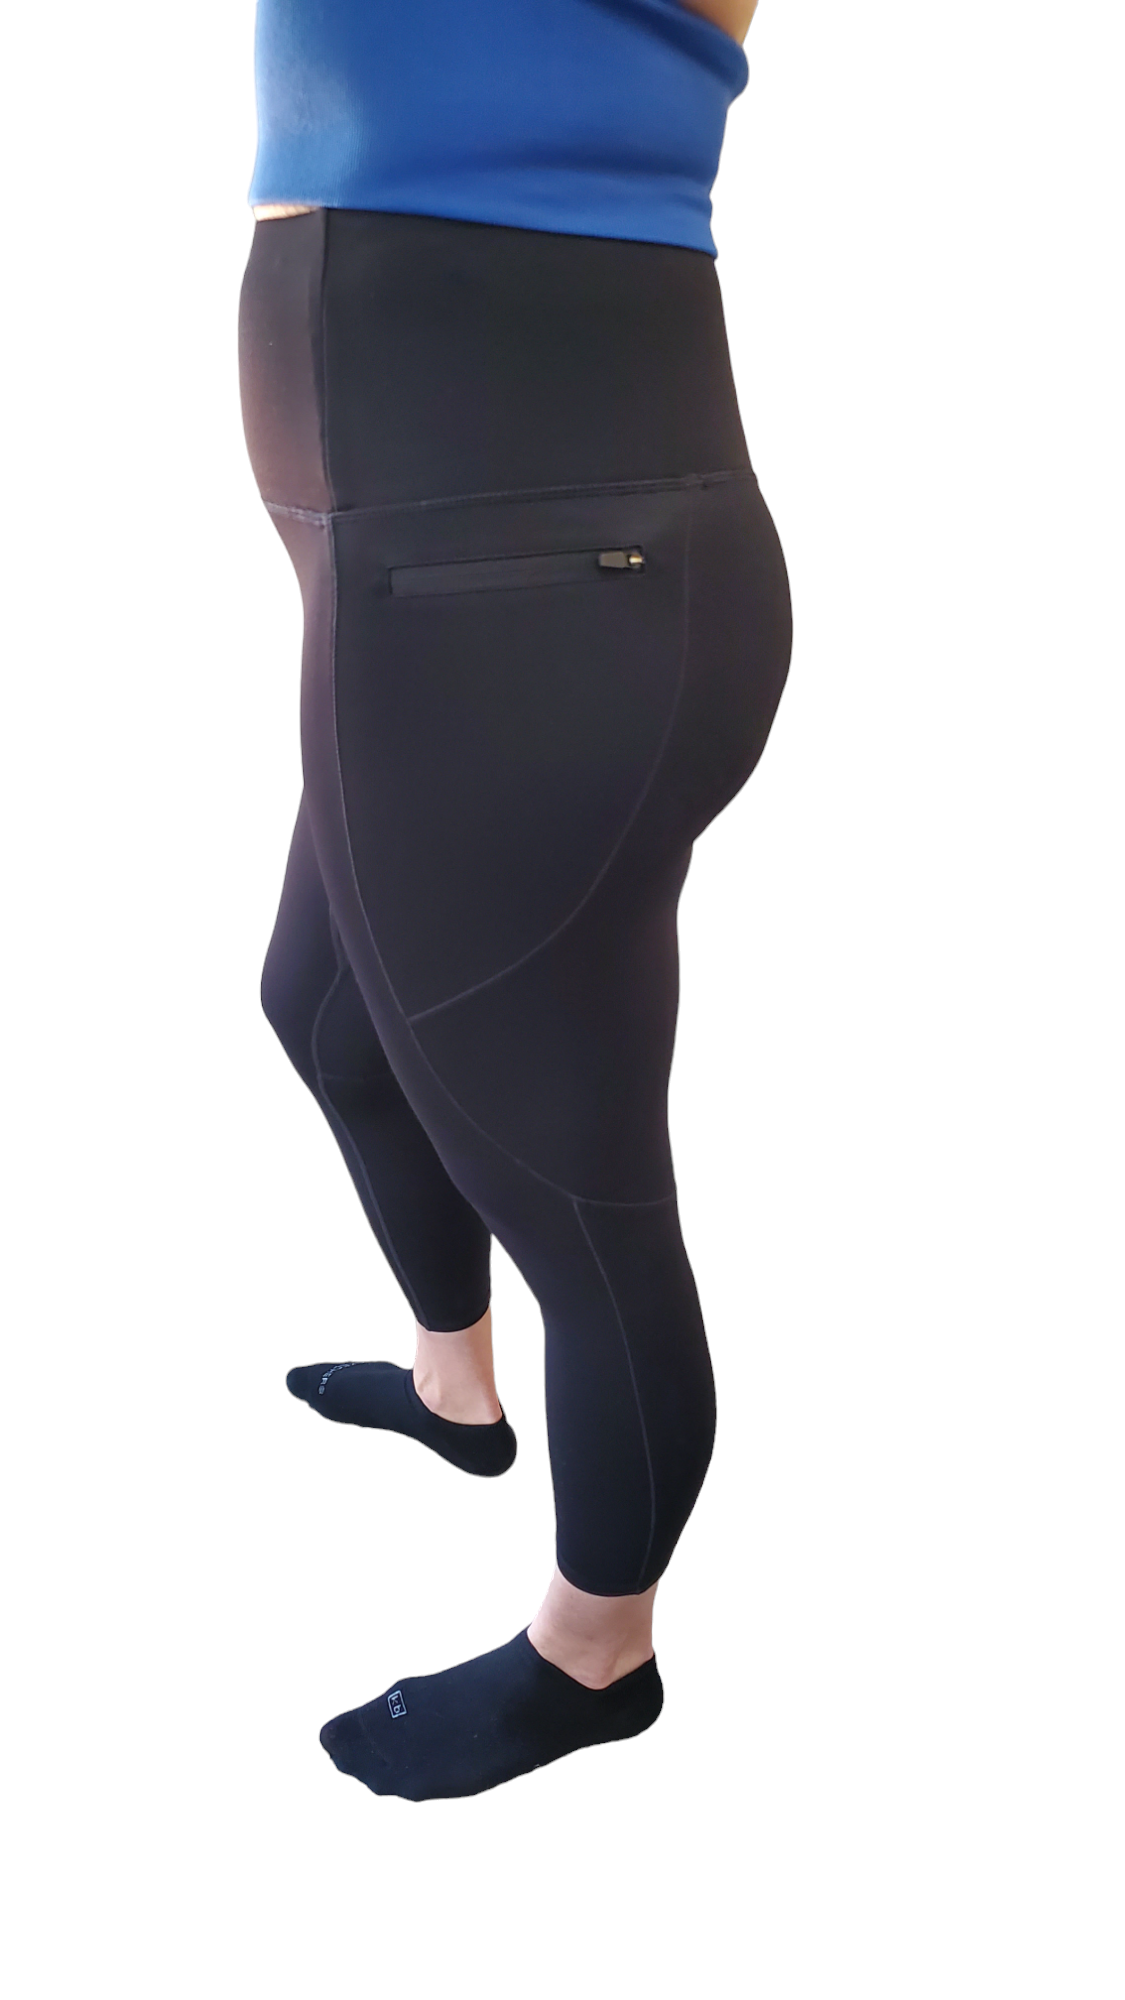 High Waisted Tummy Control Shaping Leggings with Pockets that have